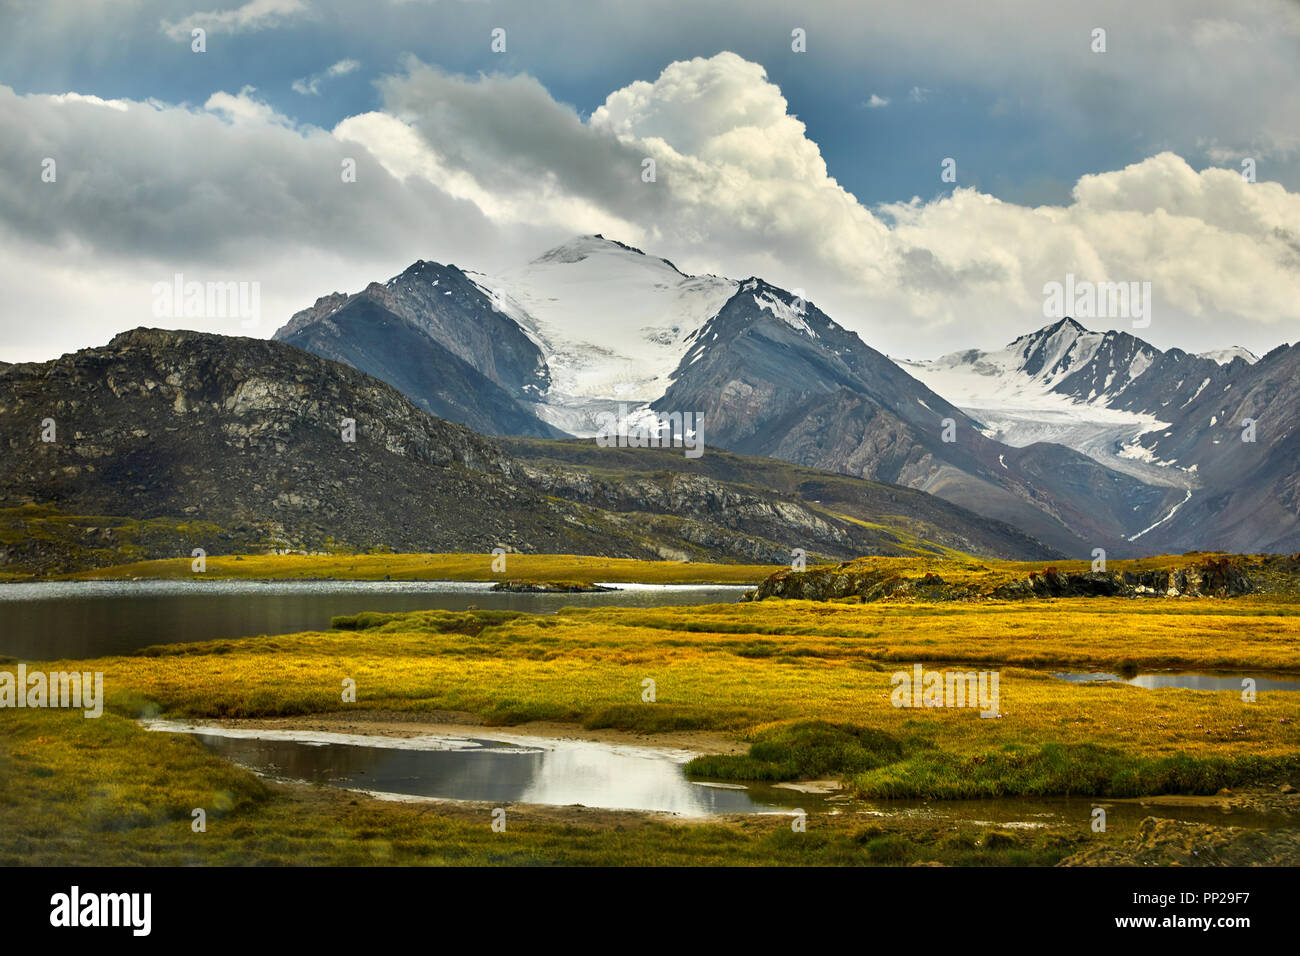 Beautiful Lake and Snowy Mountain in the valley against cloudy sky in Kyrgyzstan Stock Photo